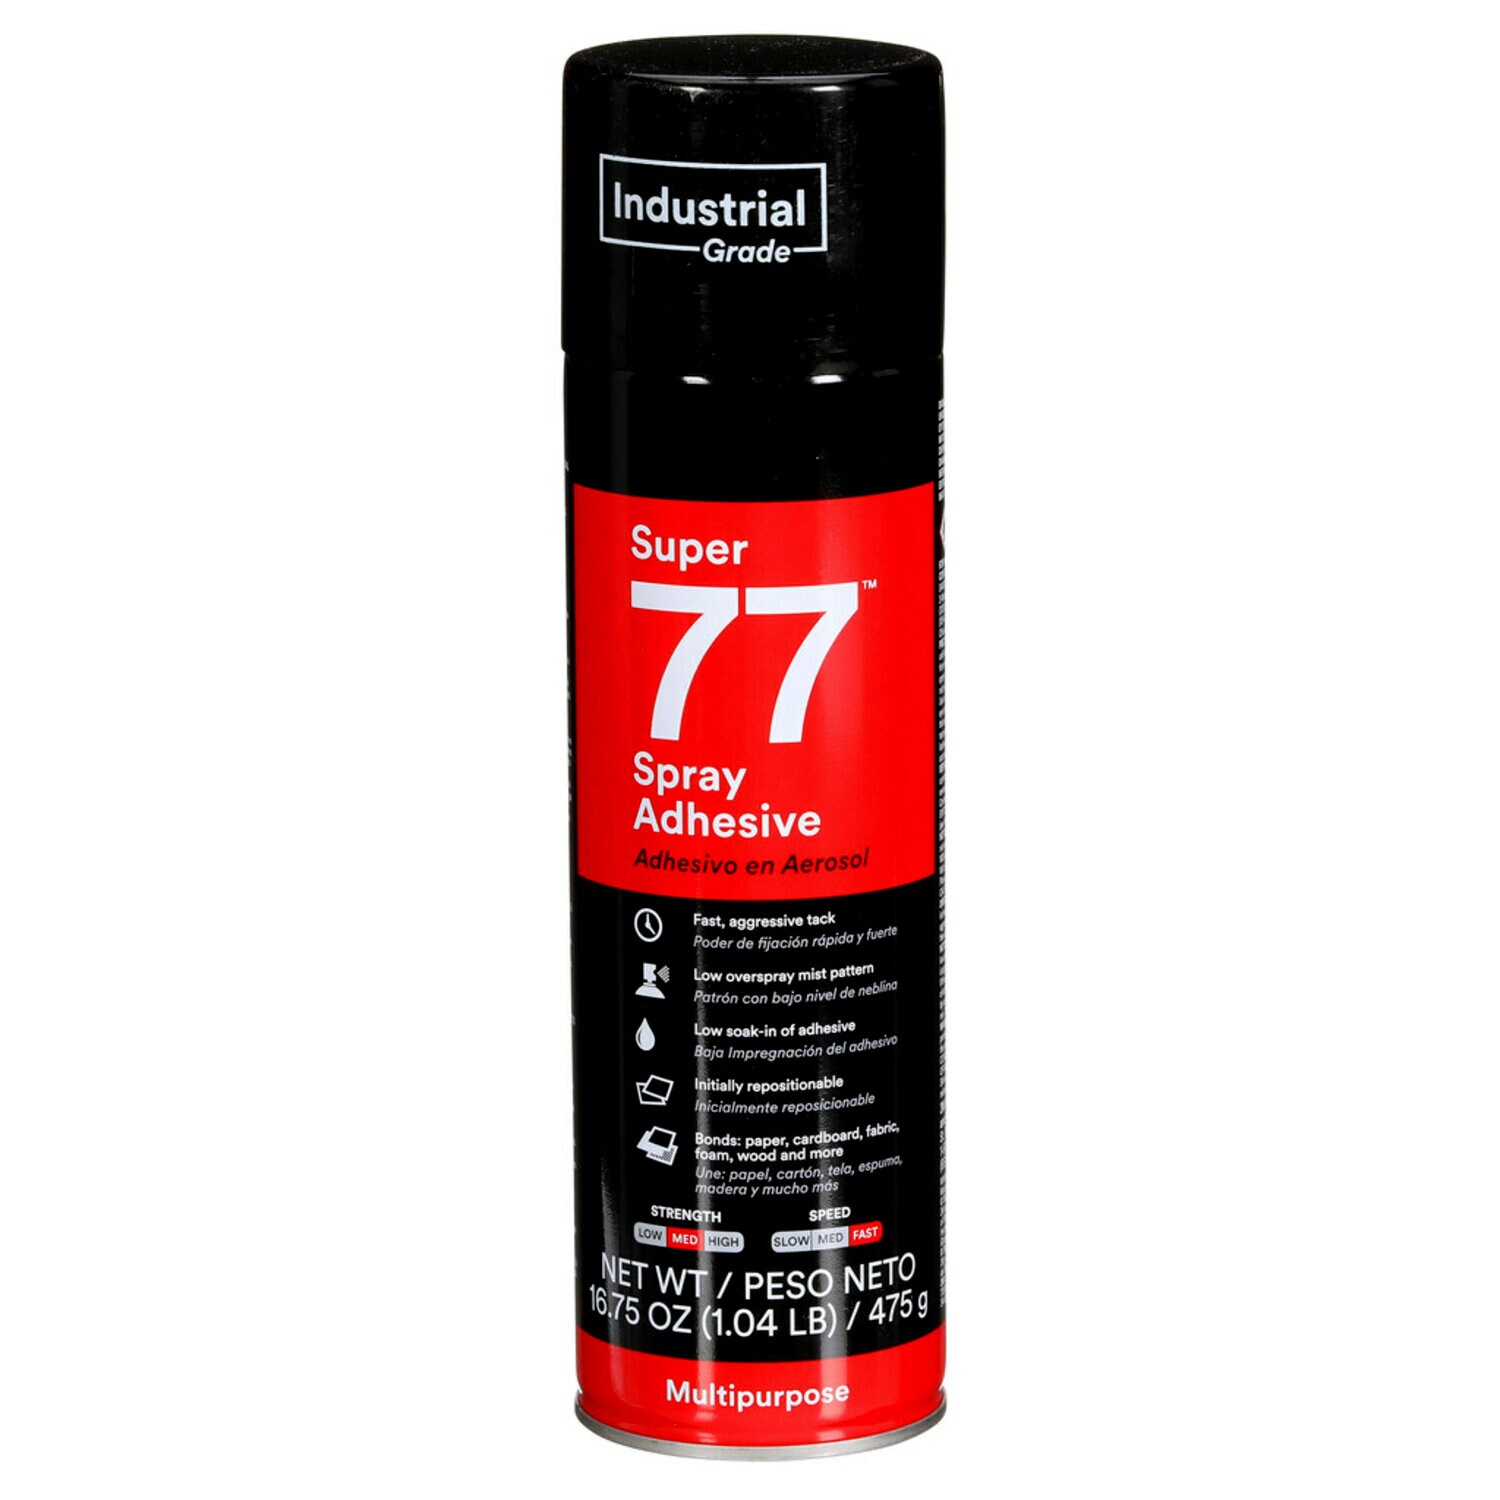 7000000931 - 3M Super 77 Multipurpose Spray Adhesive, 24 fl oz Can (Net Wt 16.75
oz), 12/Case, NOT FOR SALE IN CA AND OTHER STATES